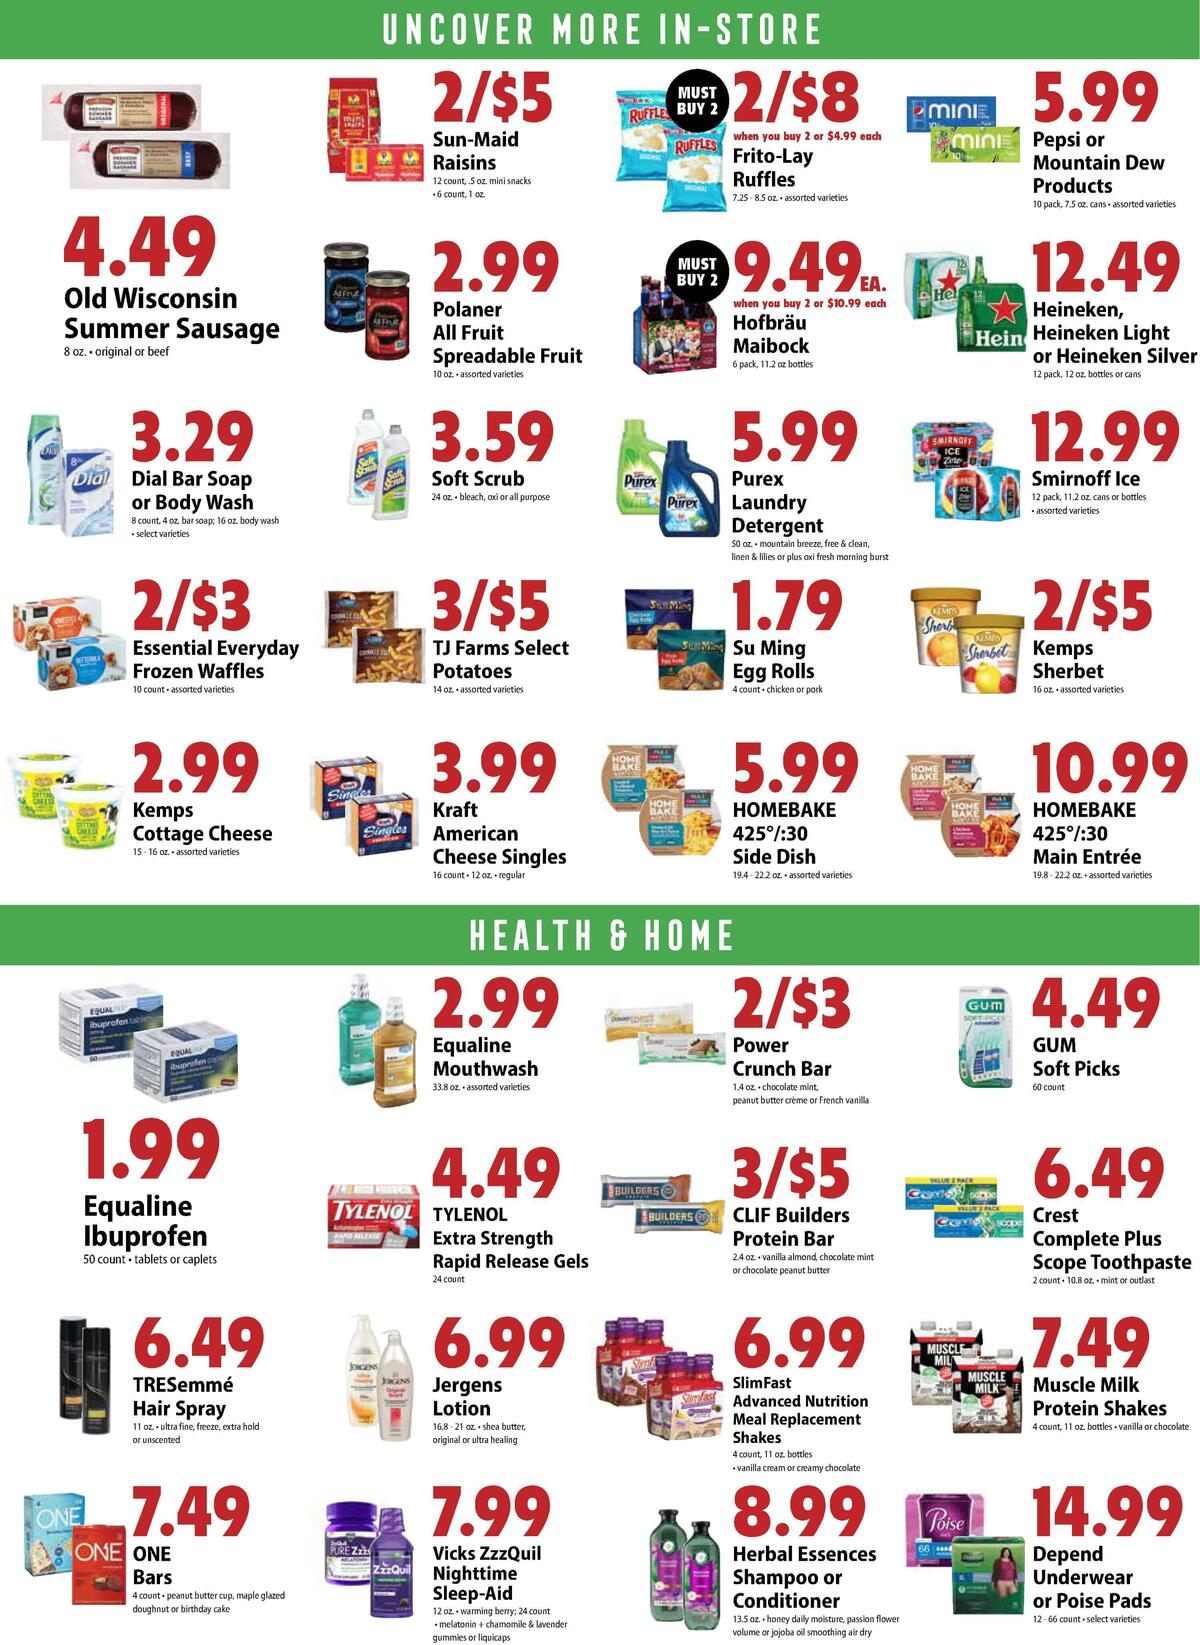 Festival Foods Weekly Ad from April 10